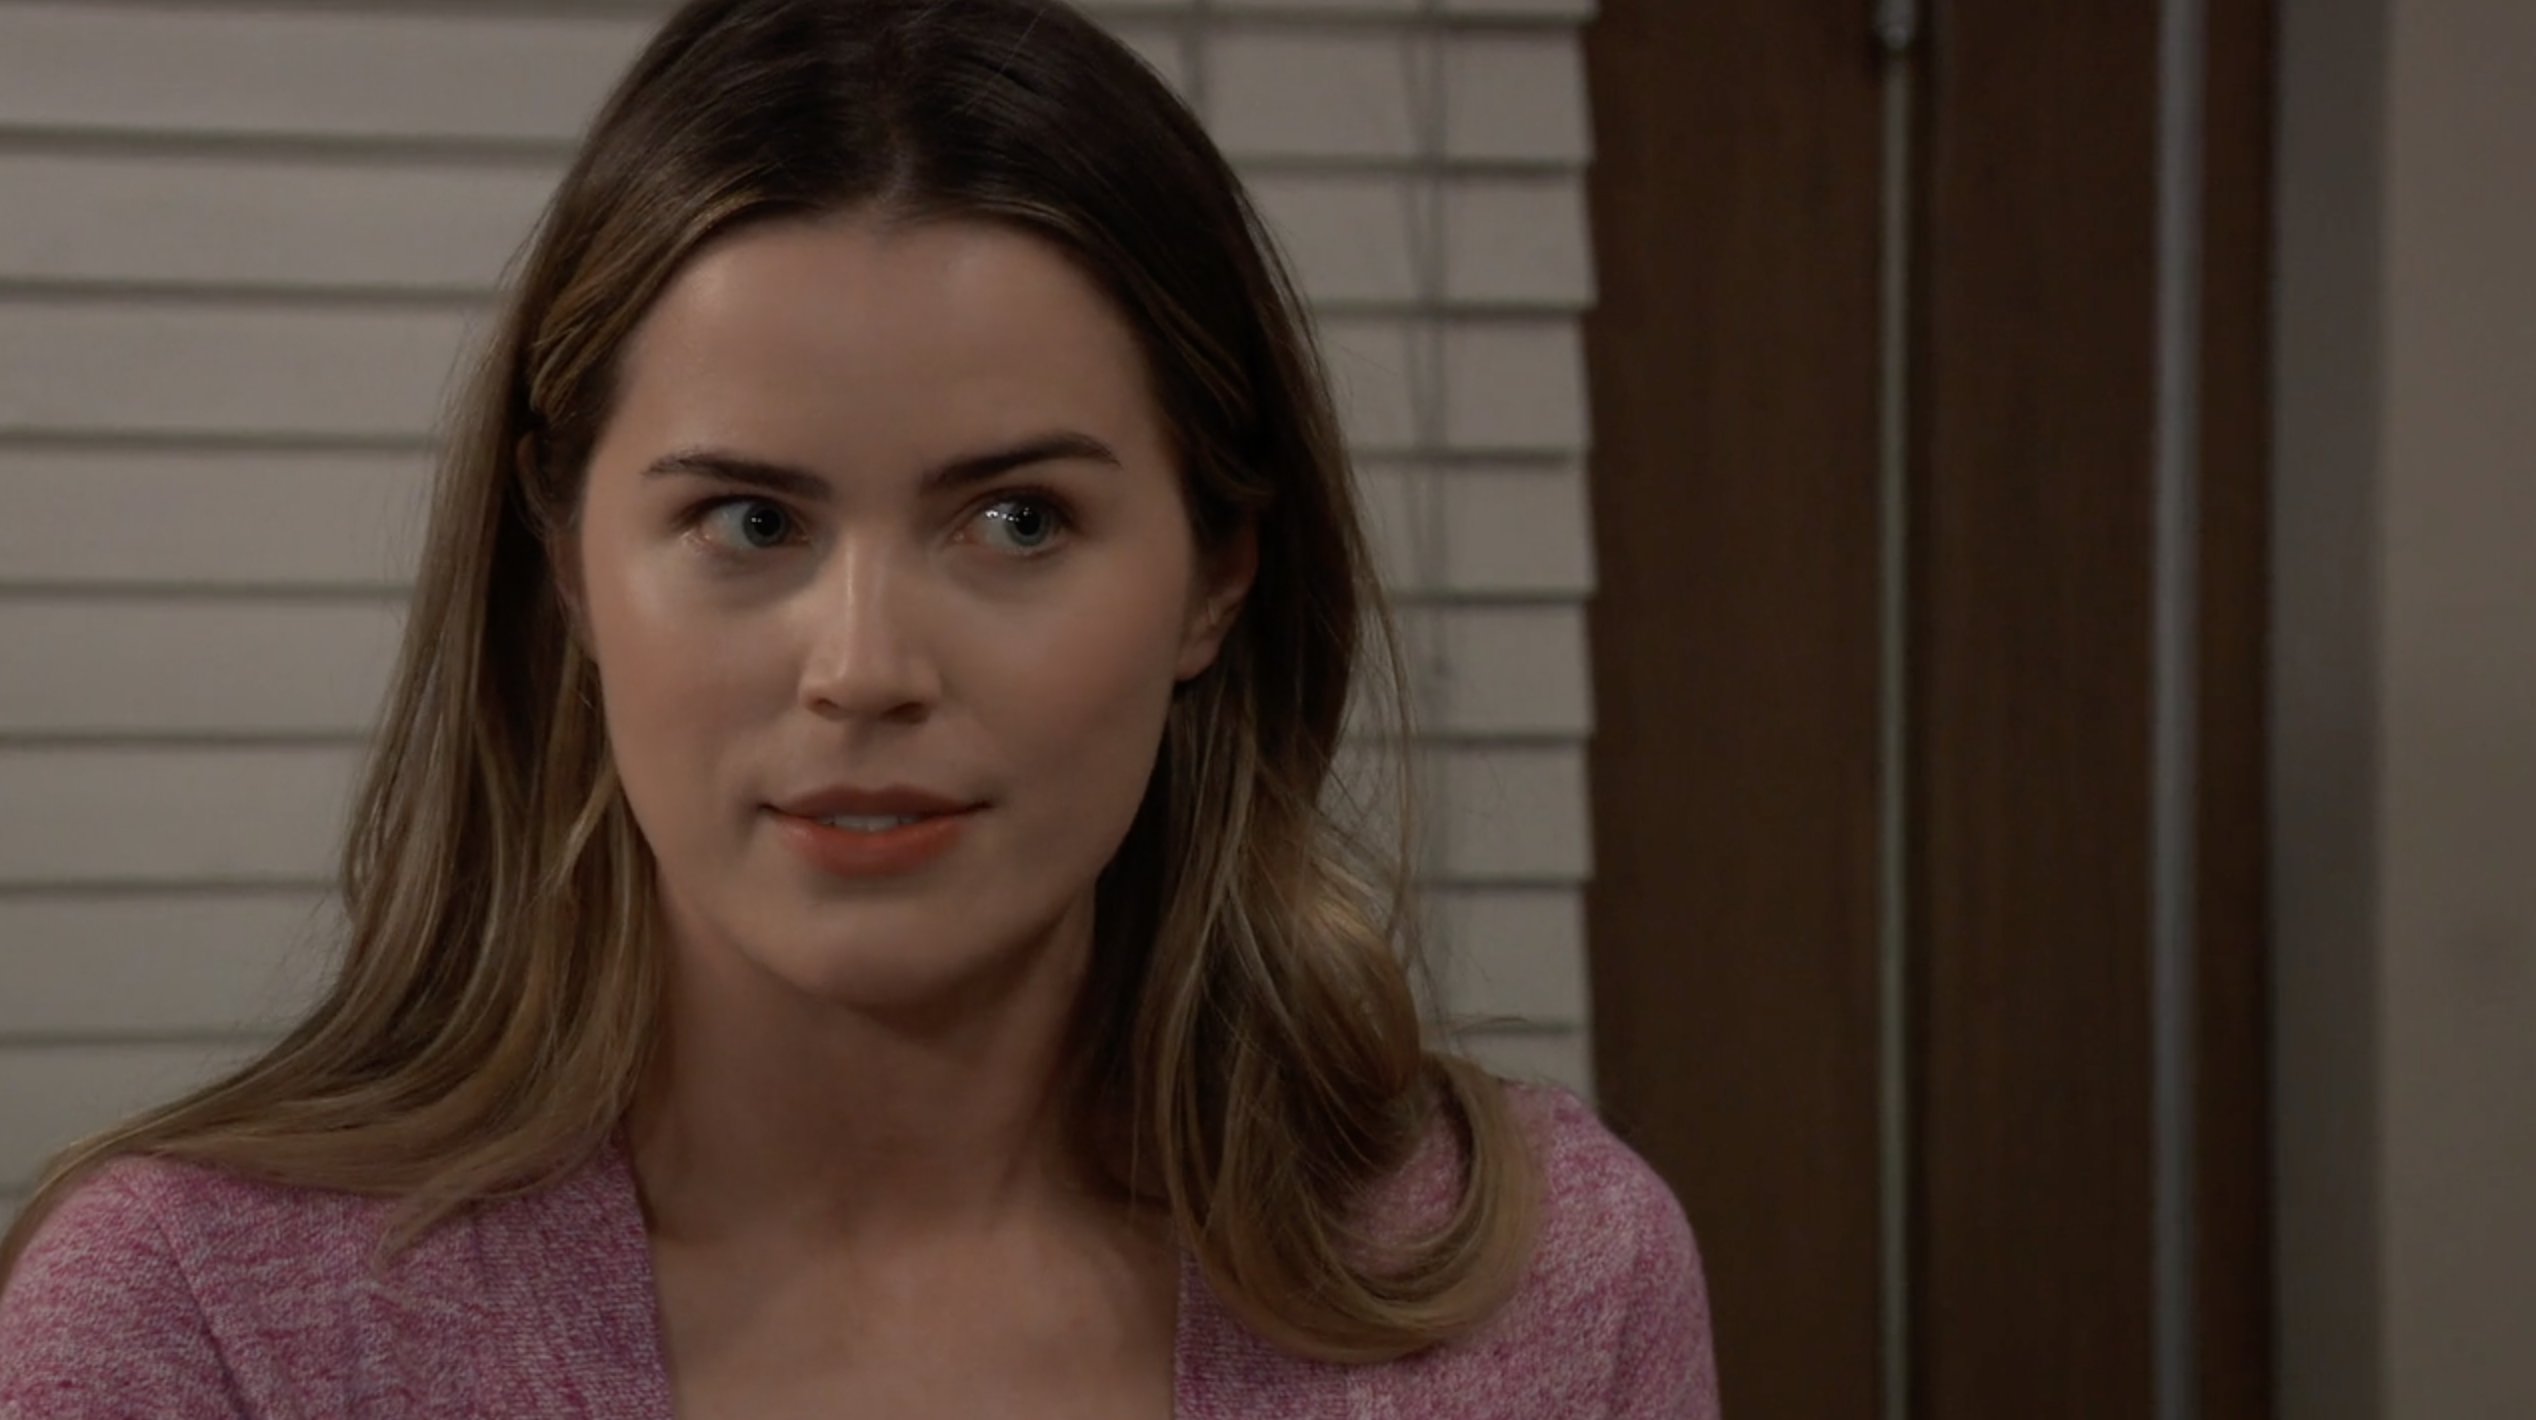 General Hospital Spoilers Things Finally Start To LOOK UP For Sasha